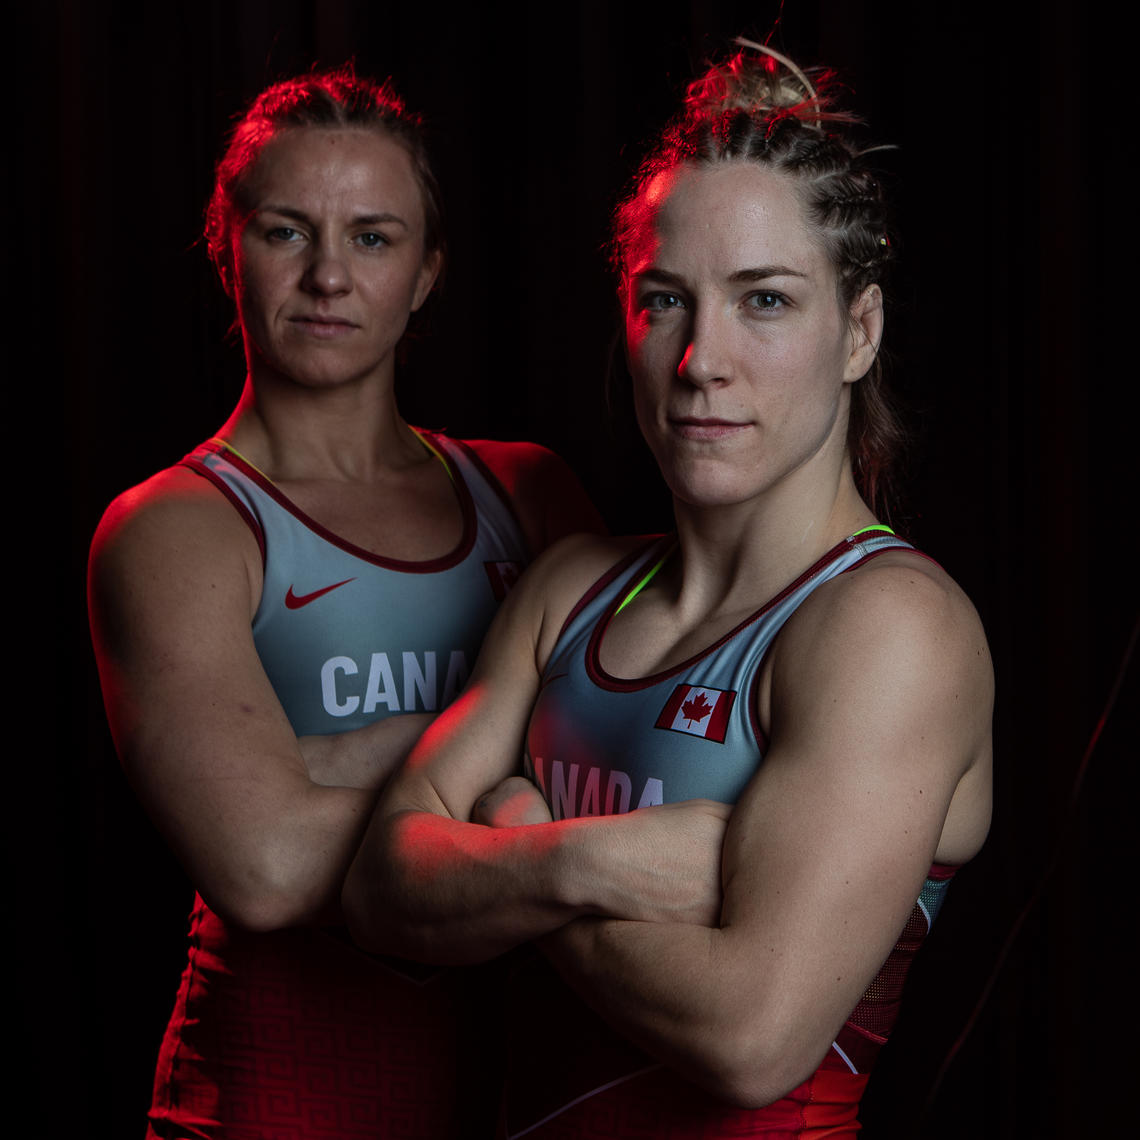 Wrestlers Erica Wiebe and Danielle Lappage both have connections to UCalgary and are representing Canada at the Tokyo 2020 Olympics.